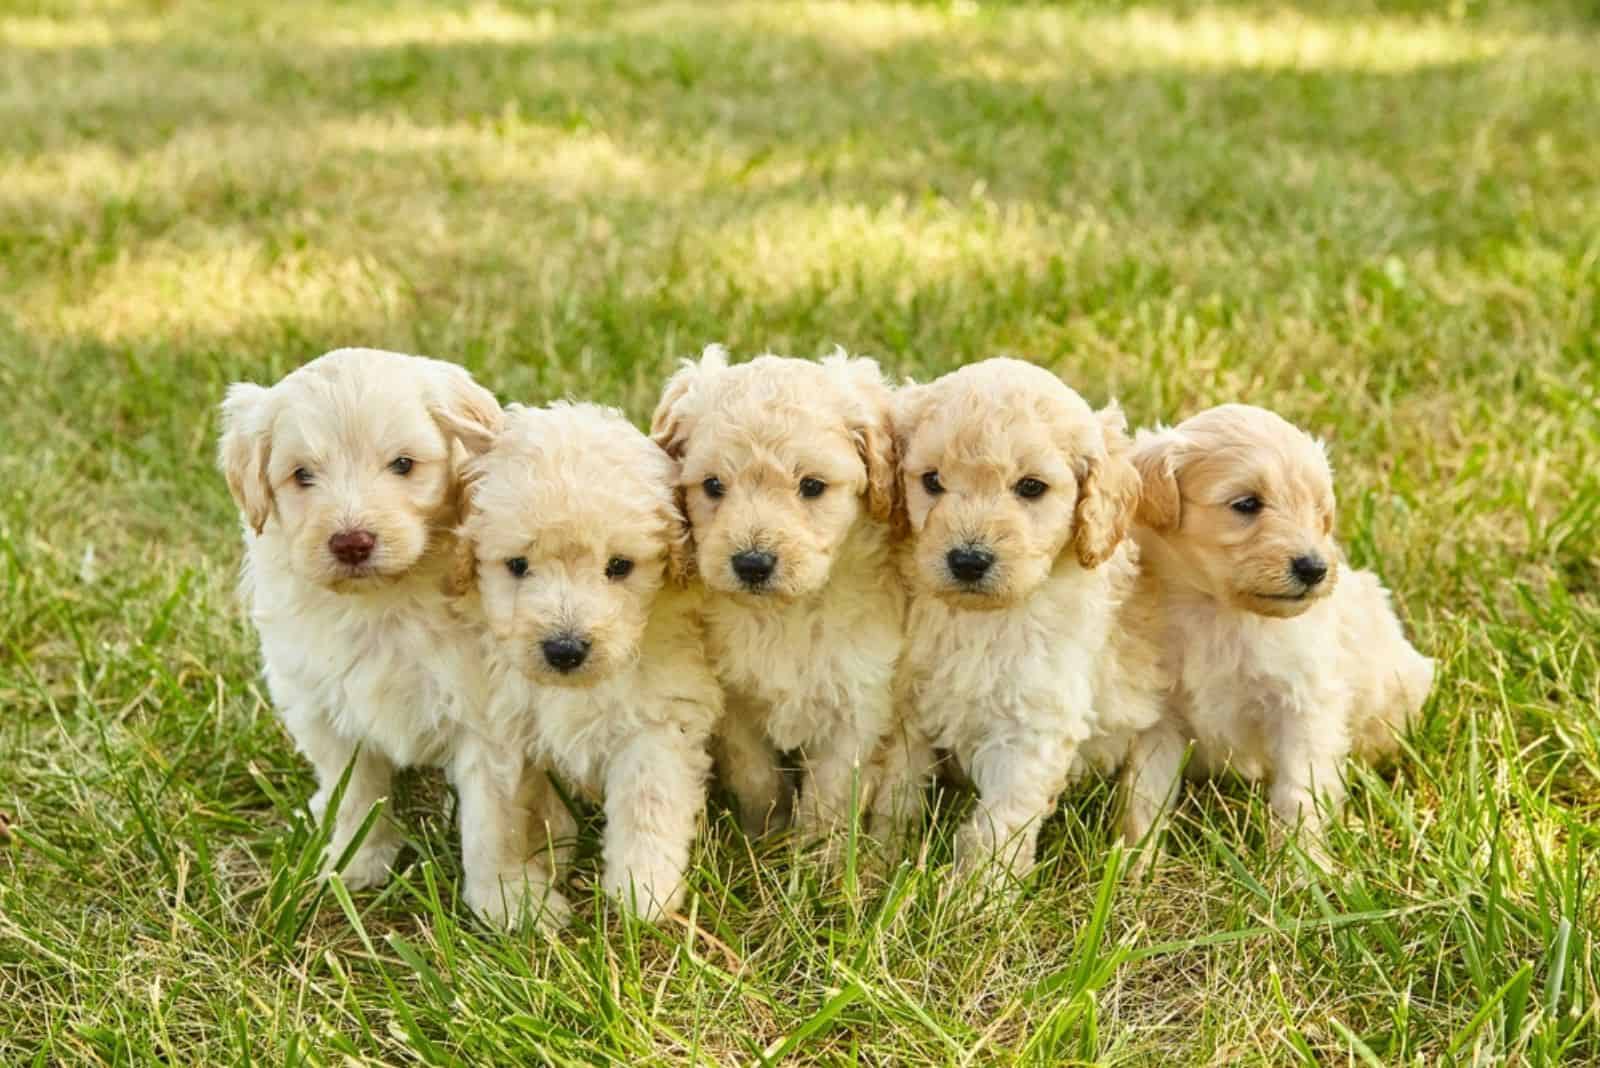 Litter of adorable white Goldendoodle puppies in grass